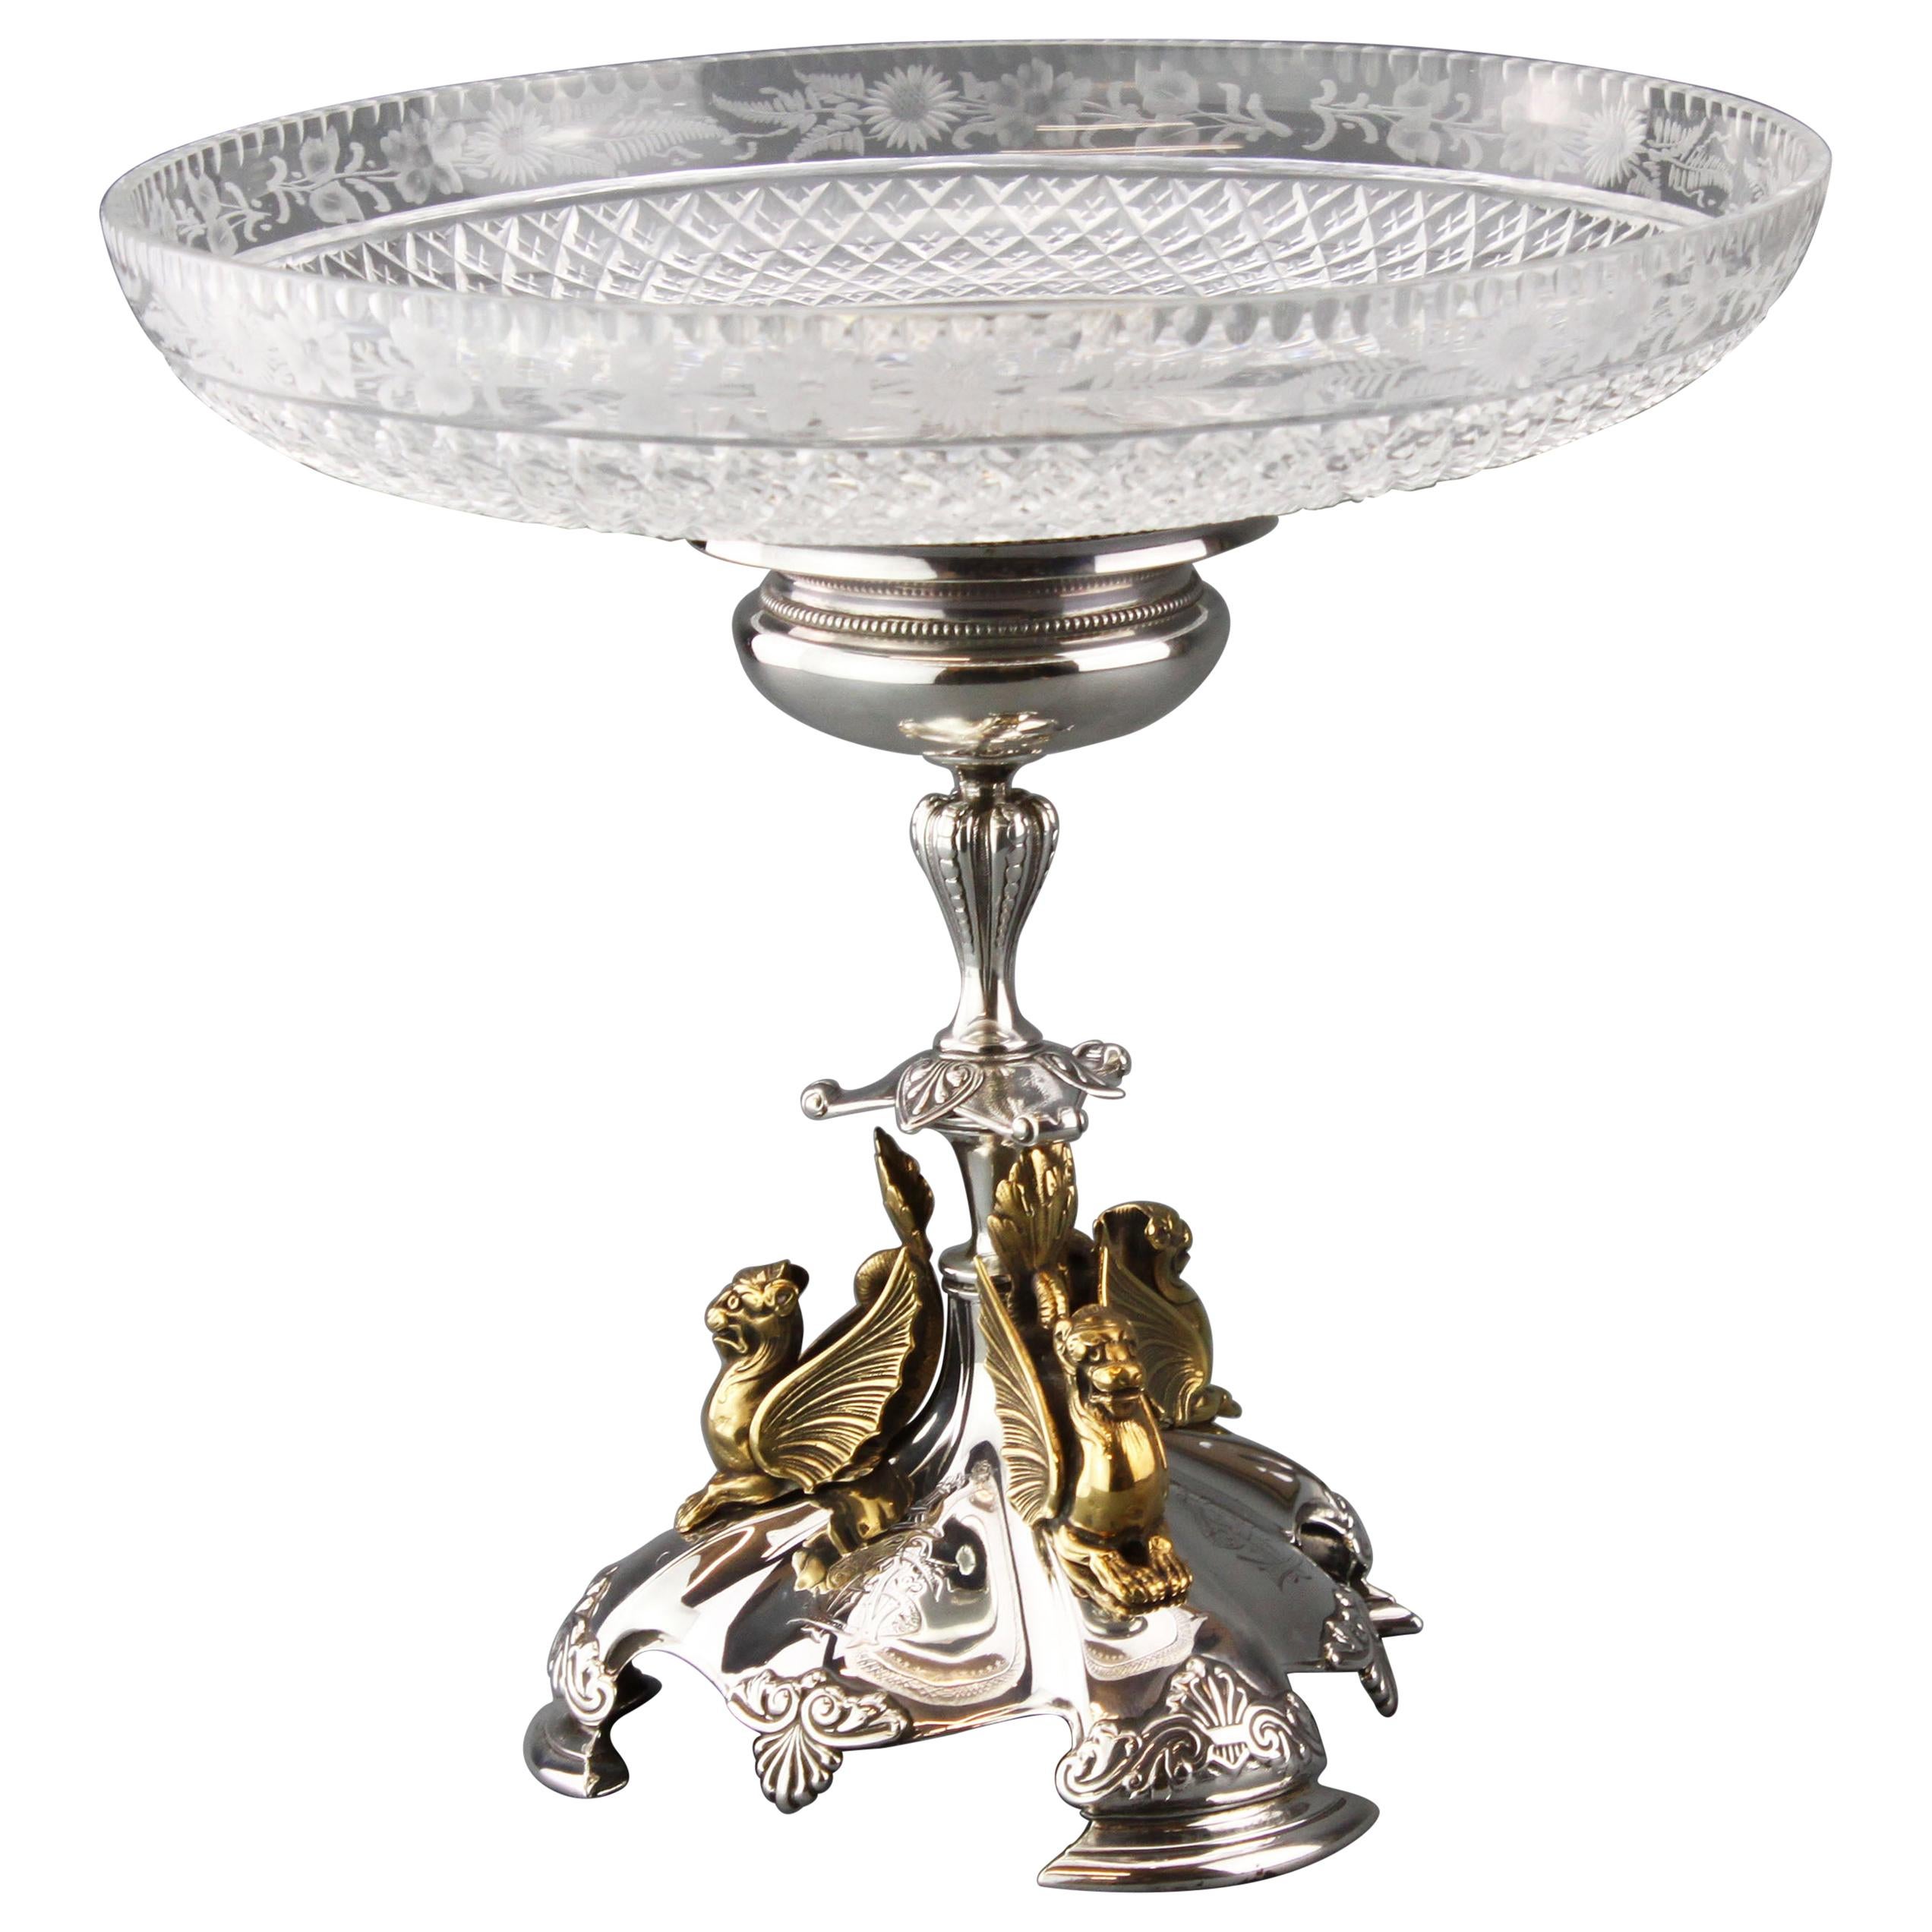 Antique Silver, Centrepiece with a Cut and Engraved Rock Crystal Bowl, 1875